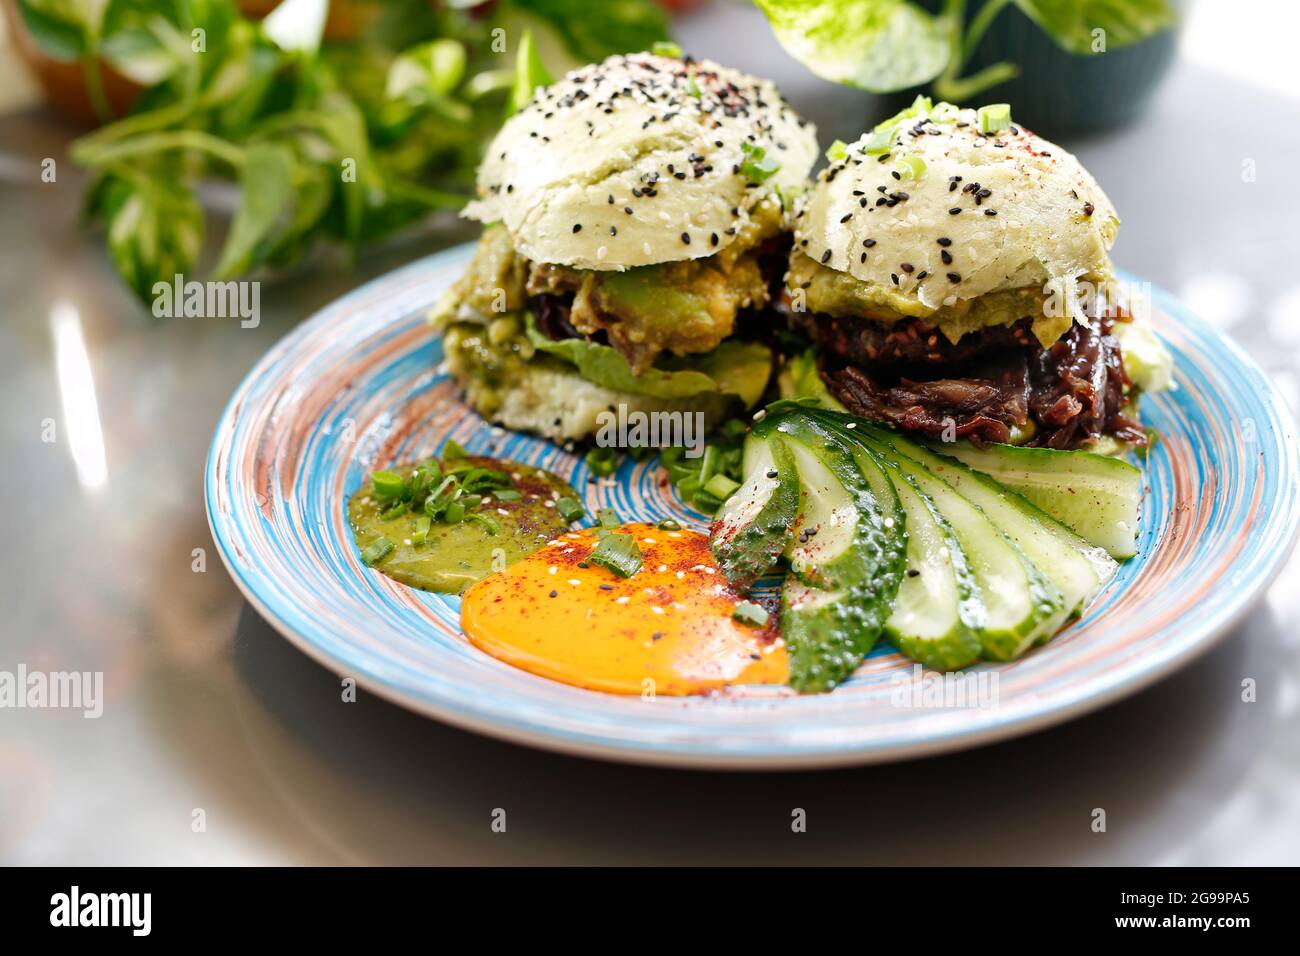 Sandwich with vegetables, fried red onion and avocado salad served with fresh cucumber and humus. Dish on a plate, food photography, serving proposal. Stock Photo